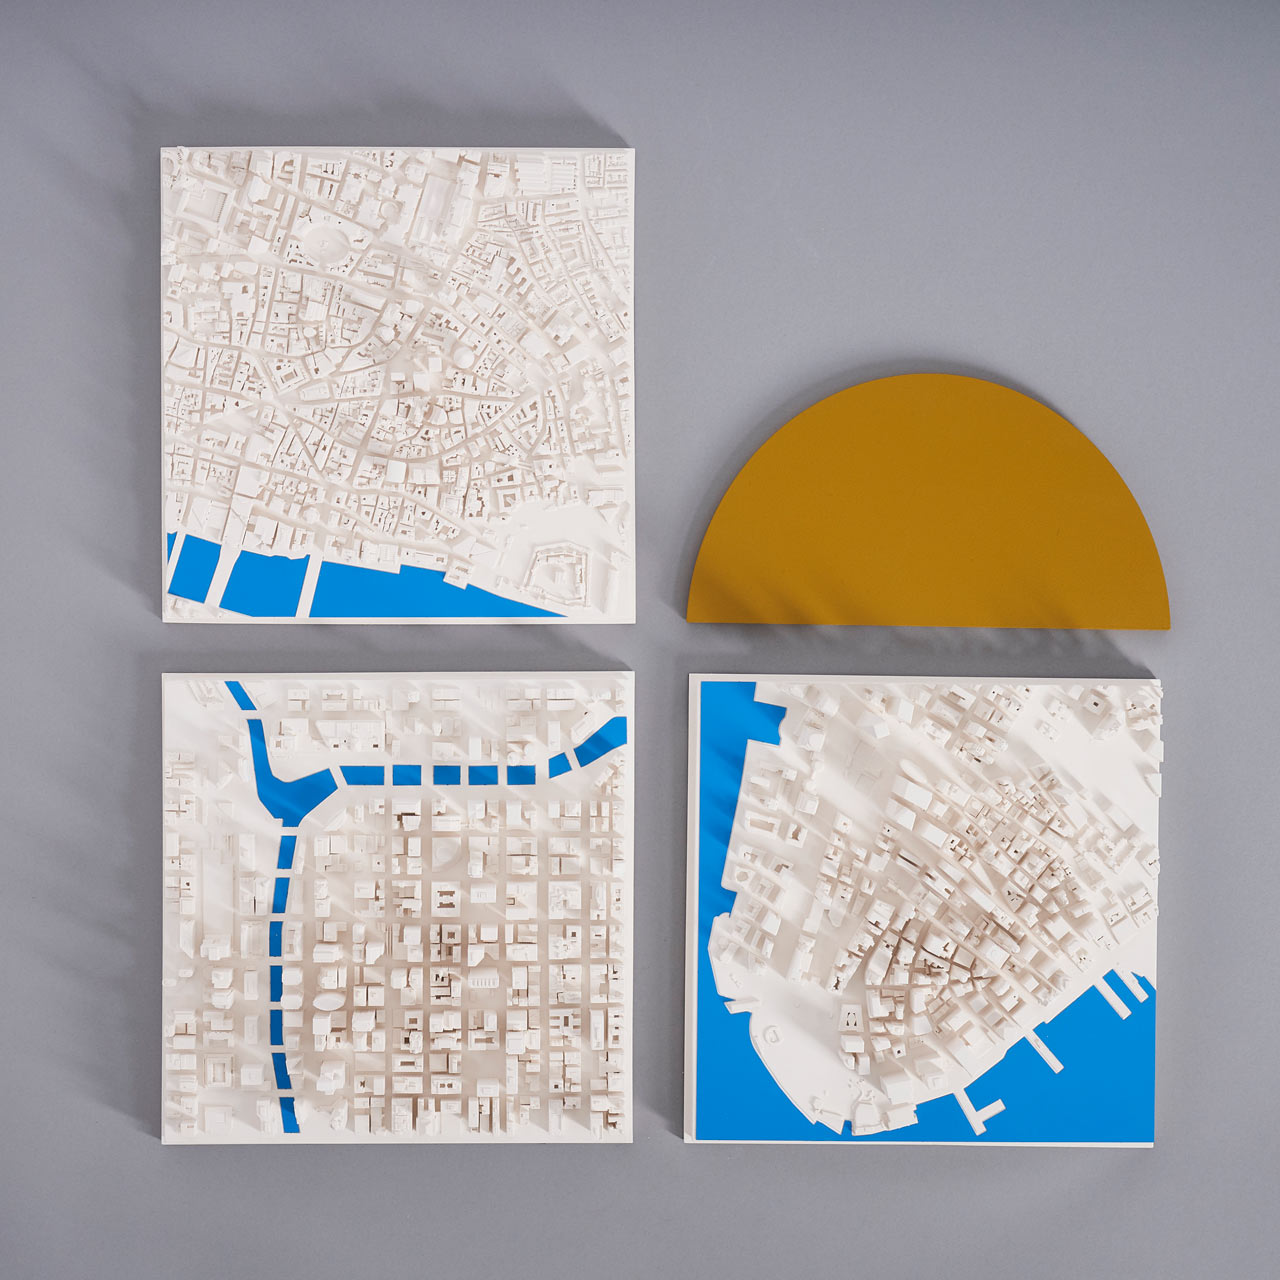 Chisel & Mouse Turns Cities into 3D Model Maps Using Digital and Handcrafted Techniques